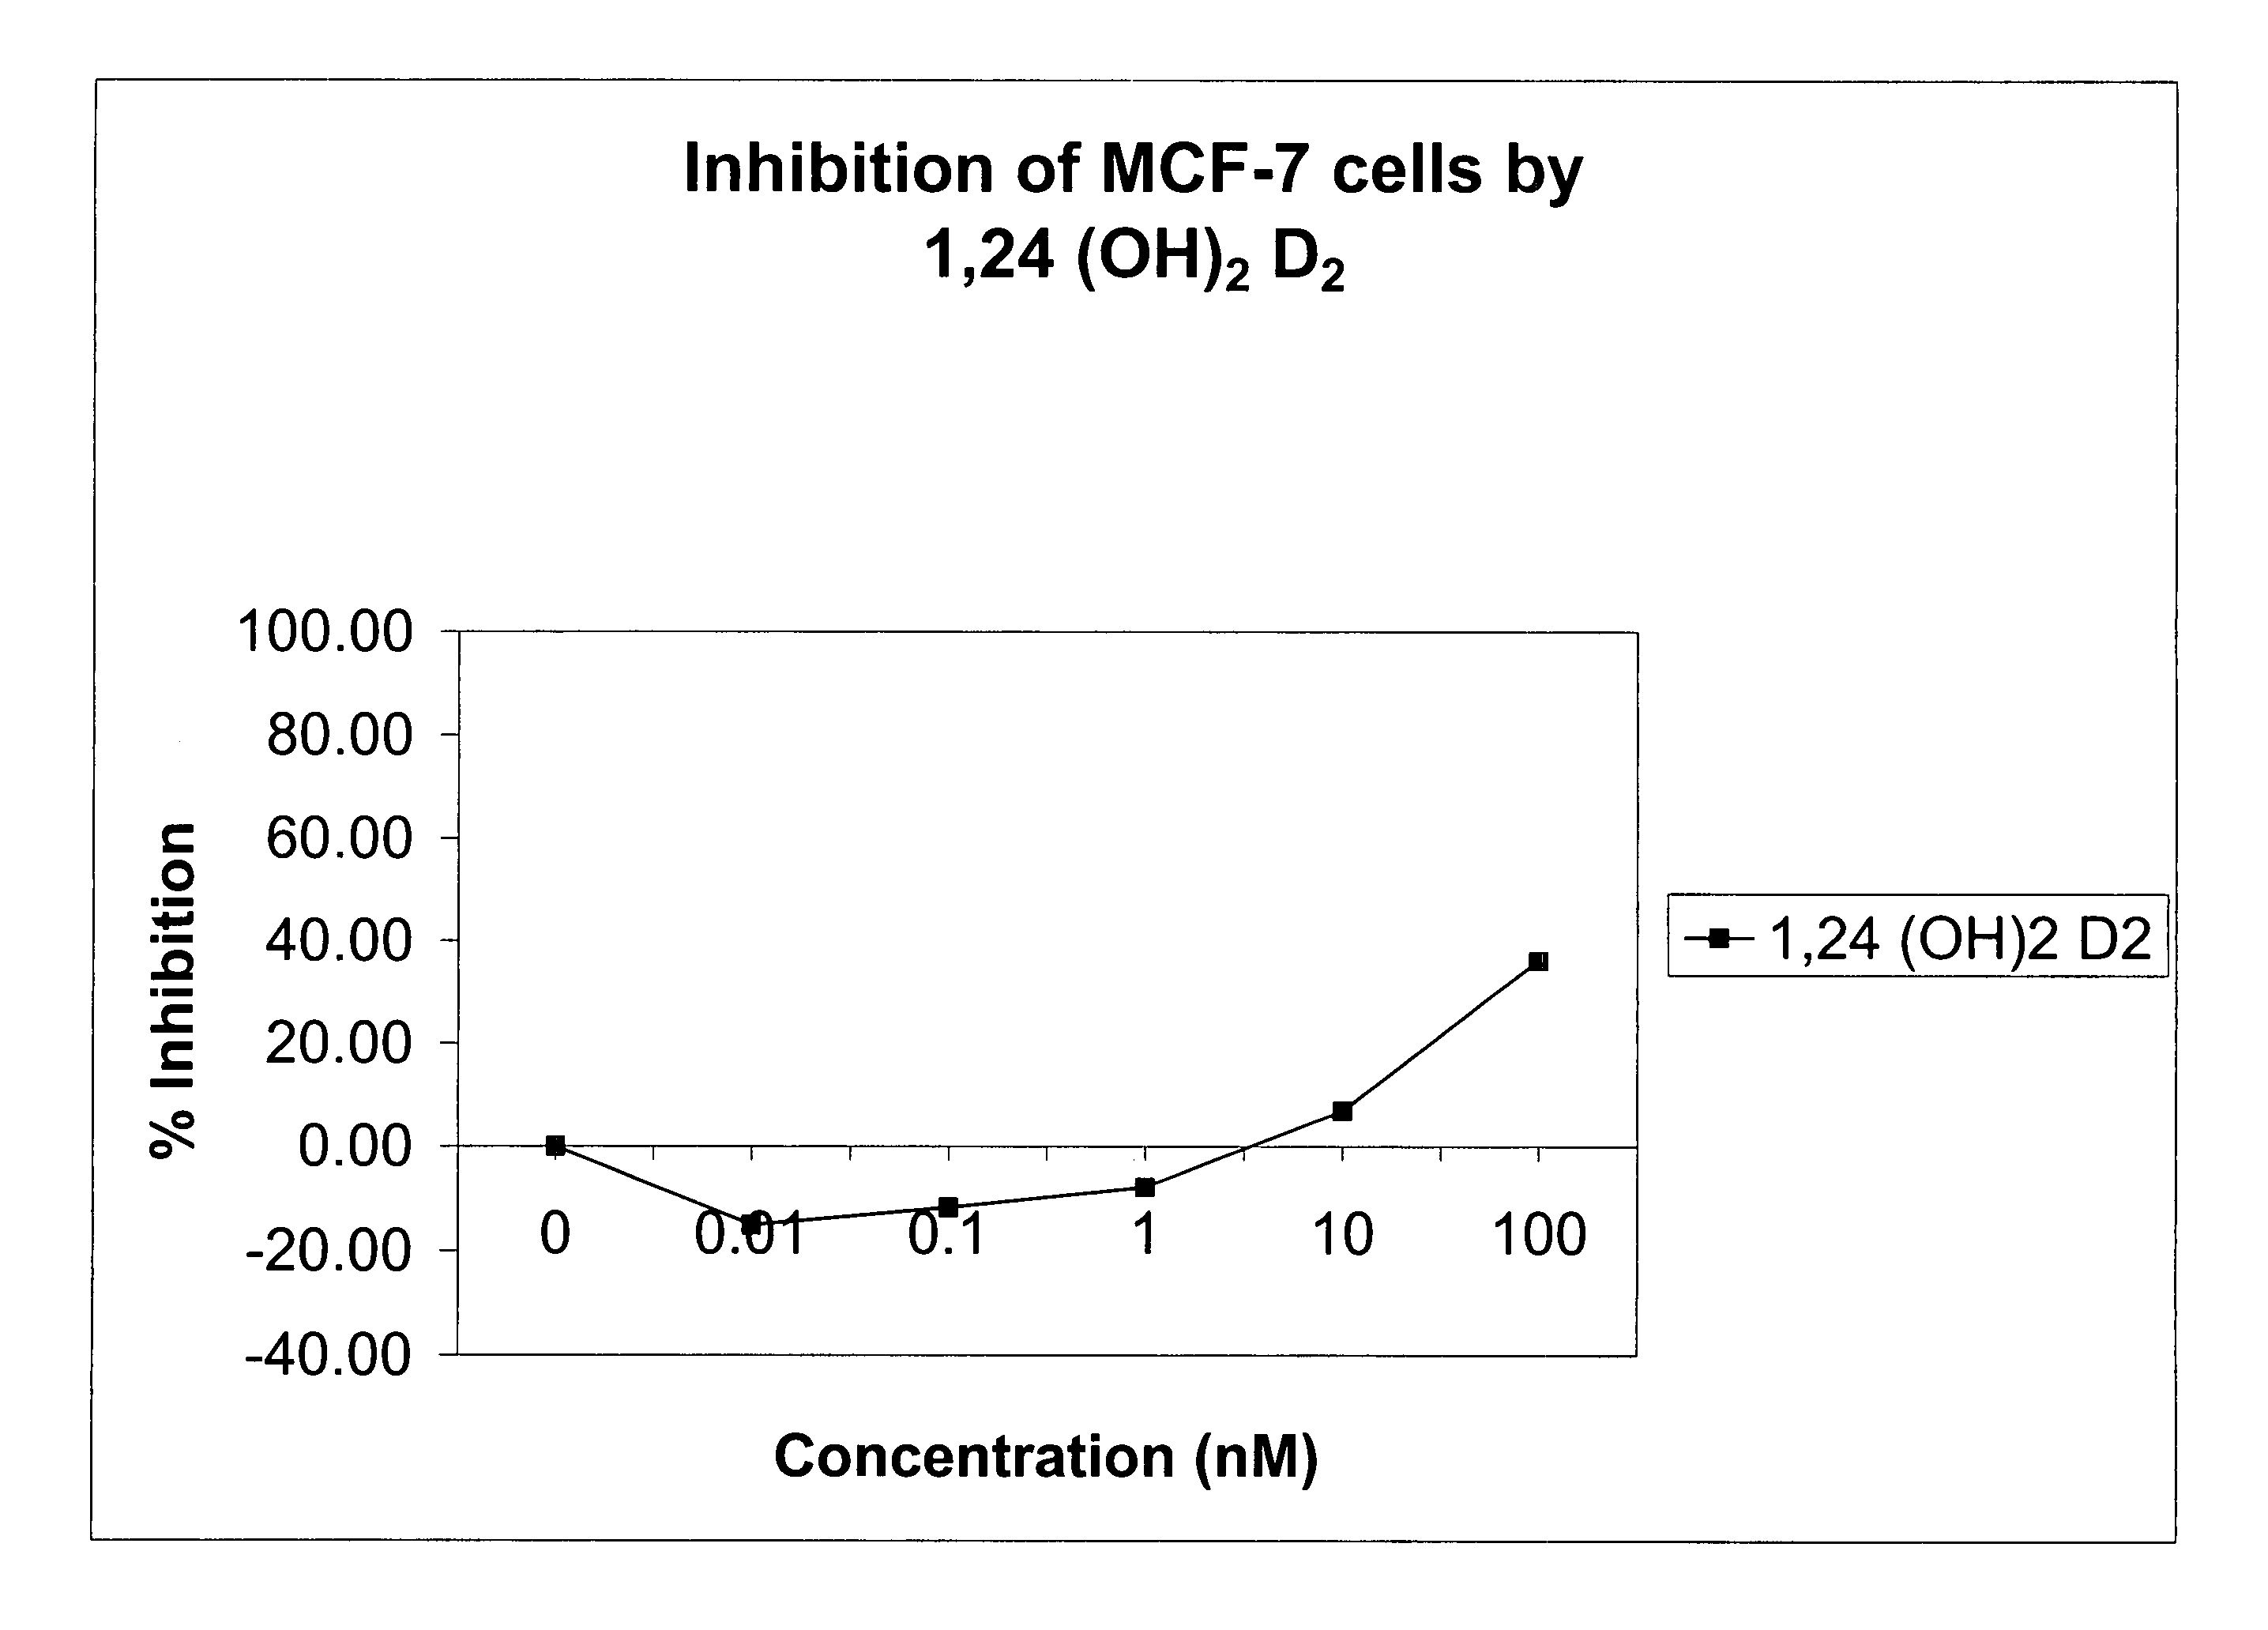 Method of treating breast cancer using a combination of vitamin D analogues and other agents